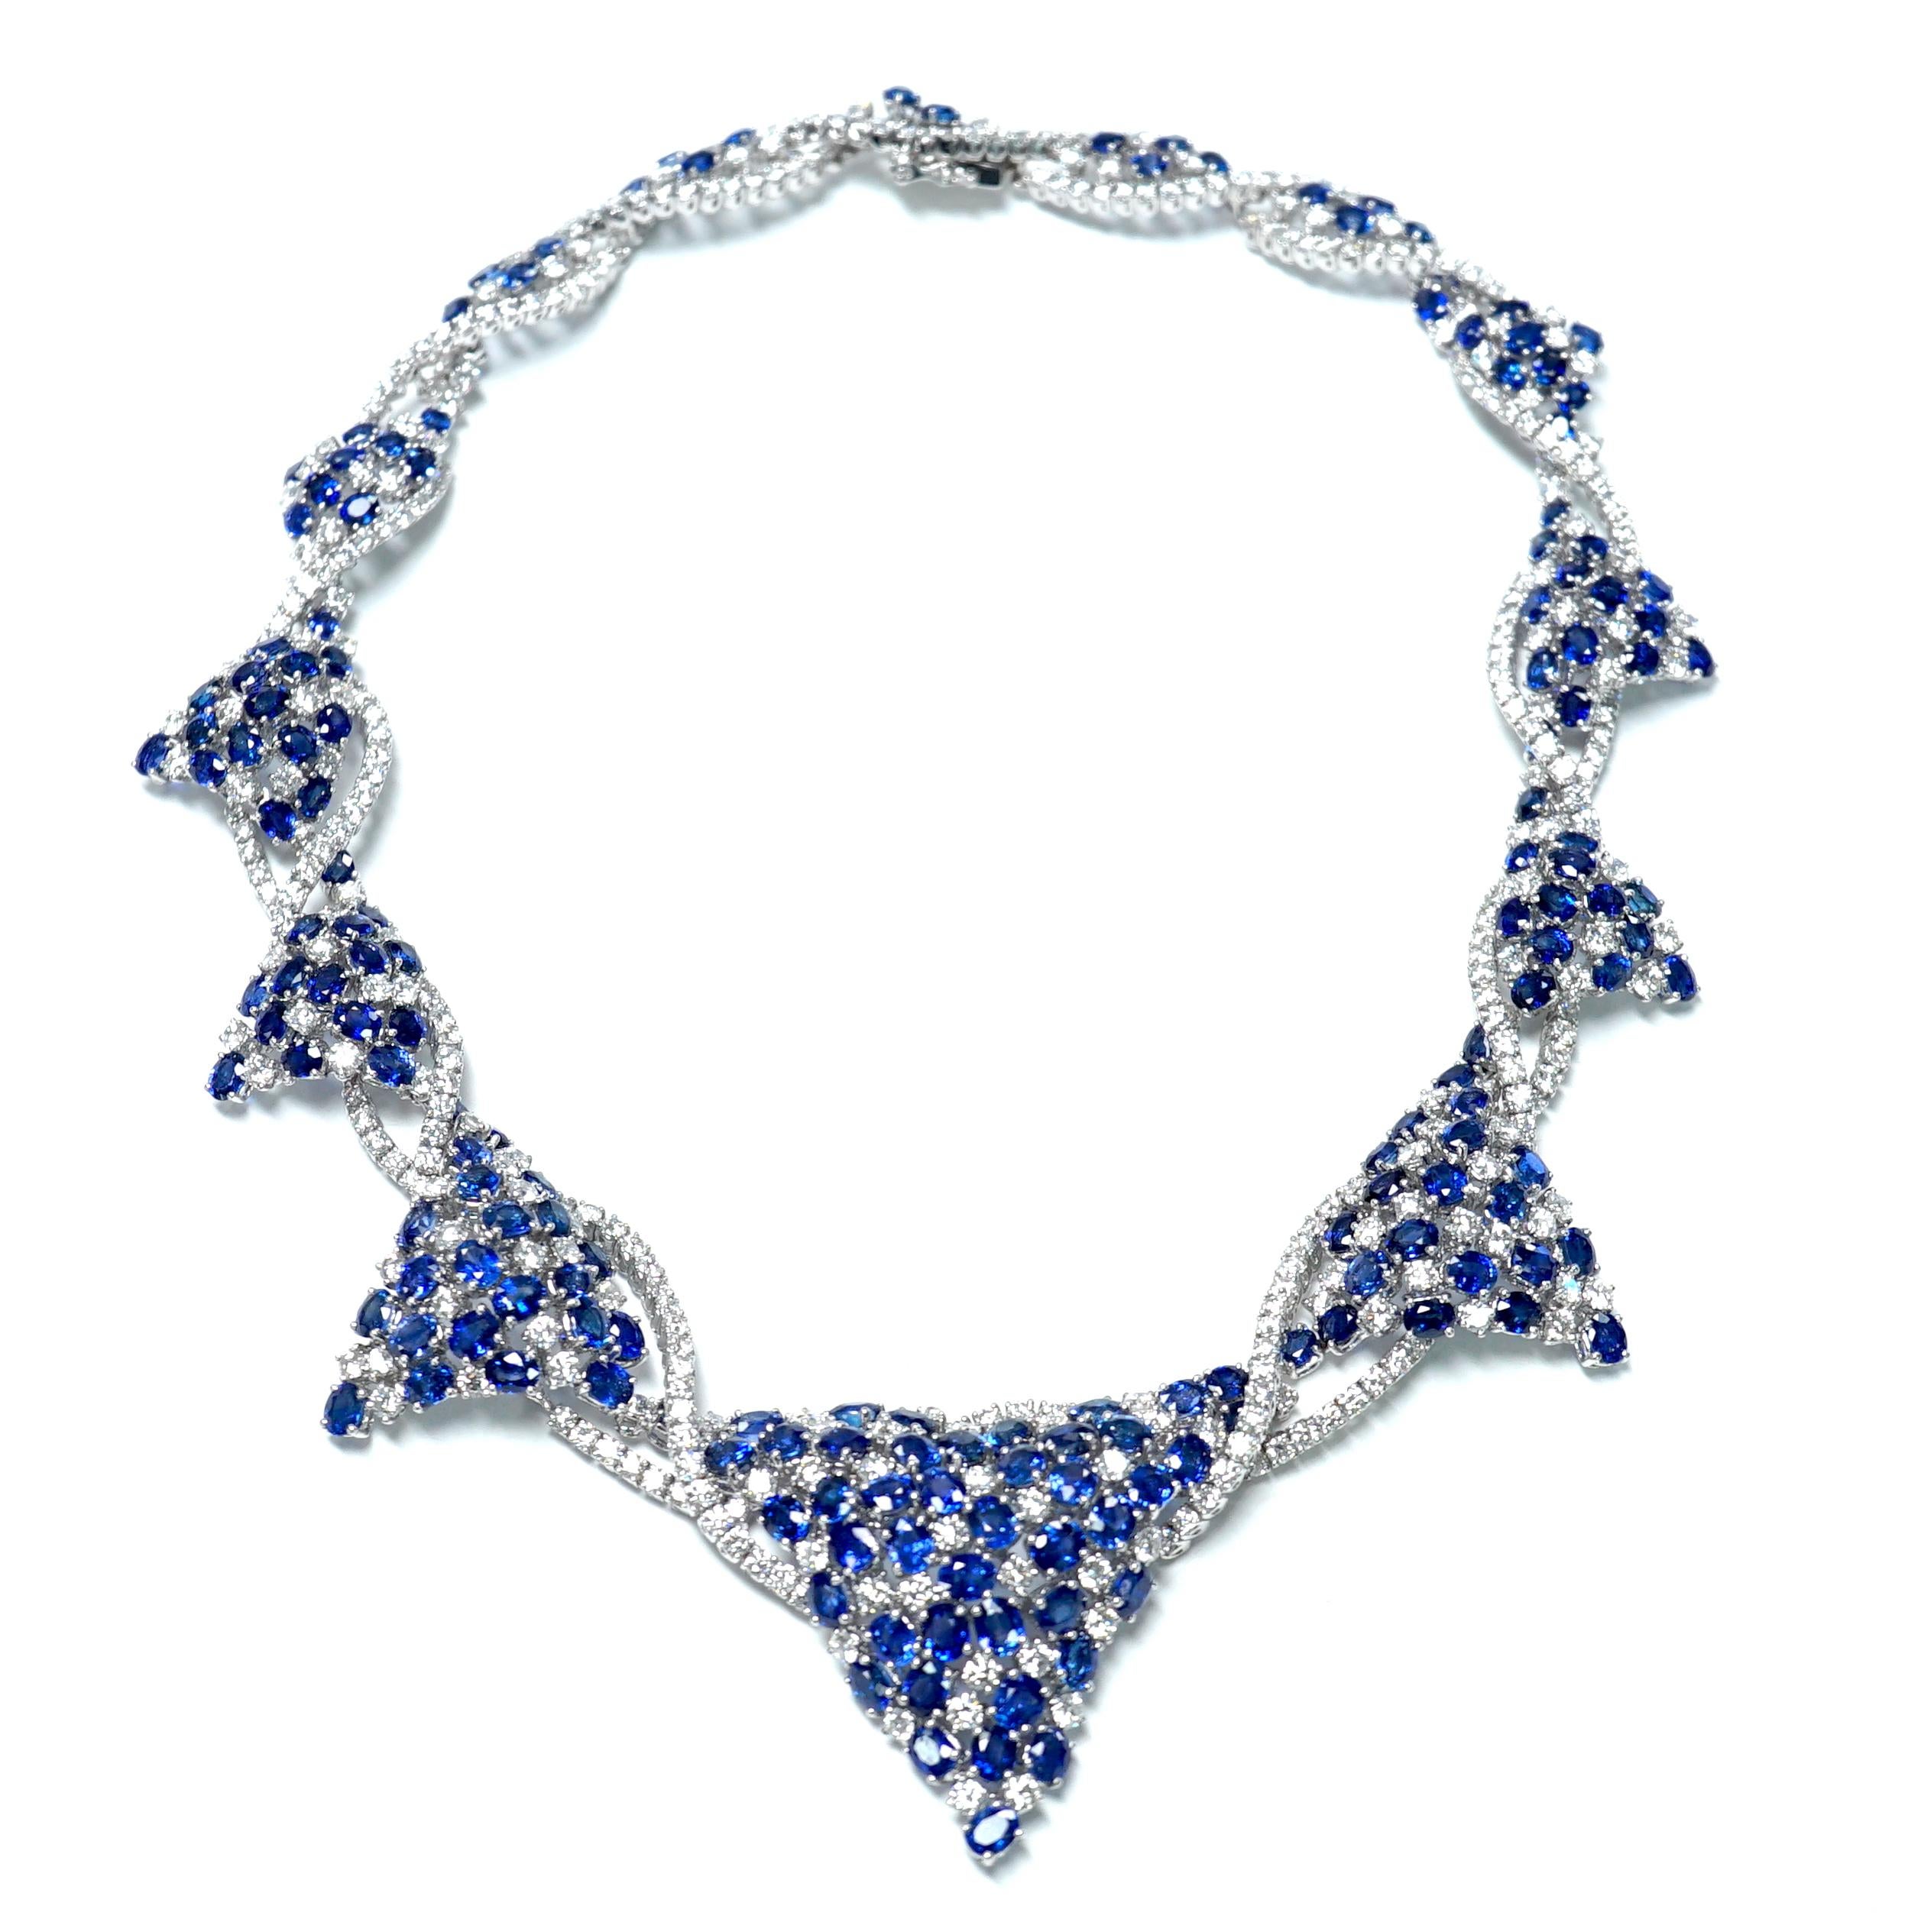 For the lover of classic, timeless jewelry!  This 18 karat white gold and diamond stunner is just the answer!  Composed of 28.48 carats of diamonds, along with 69.65 carats of bright blue sapphires, this necklace would compliment any outfit!
The